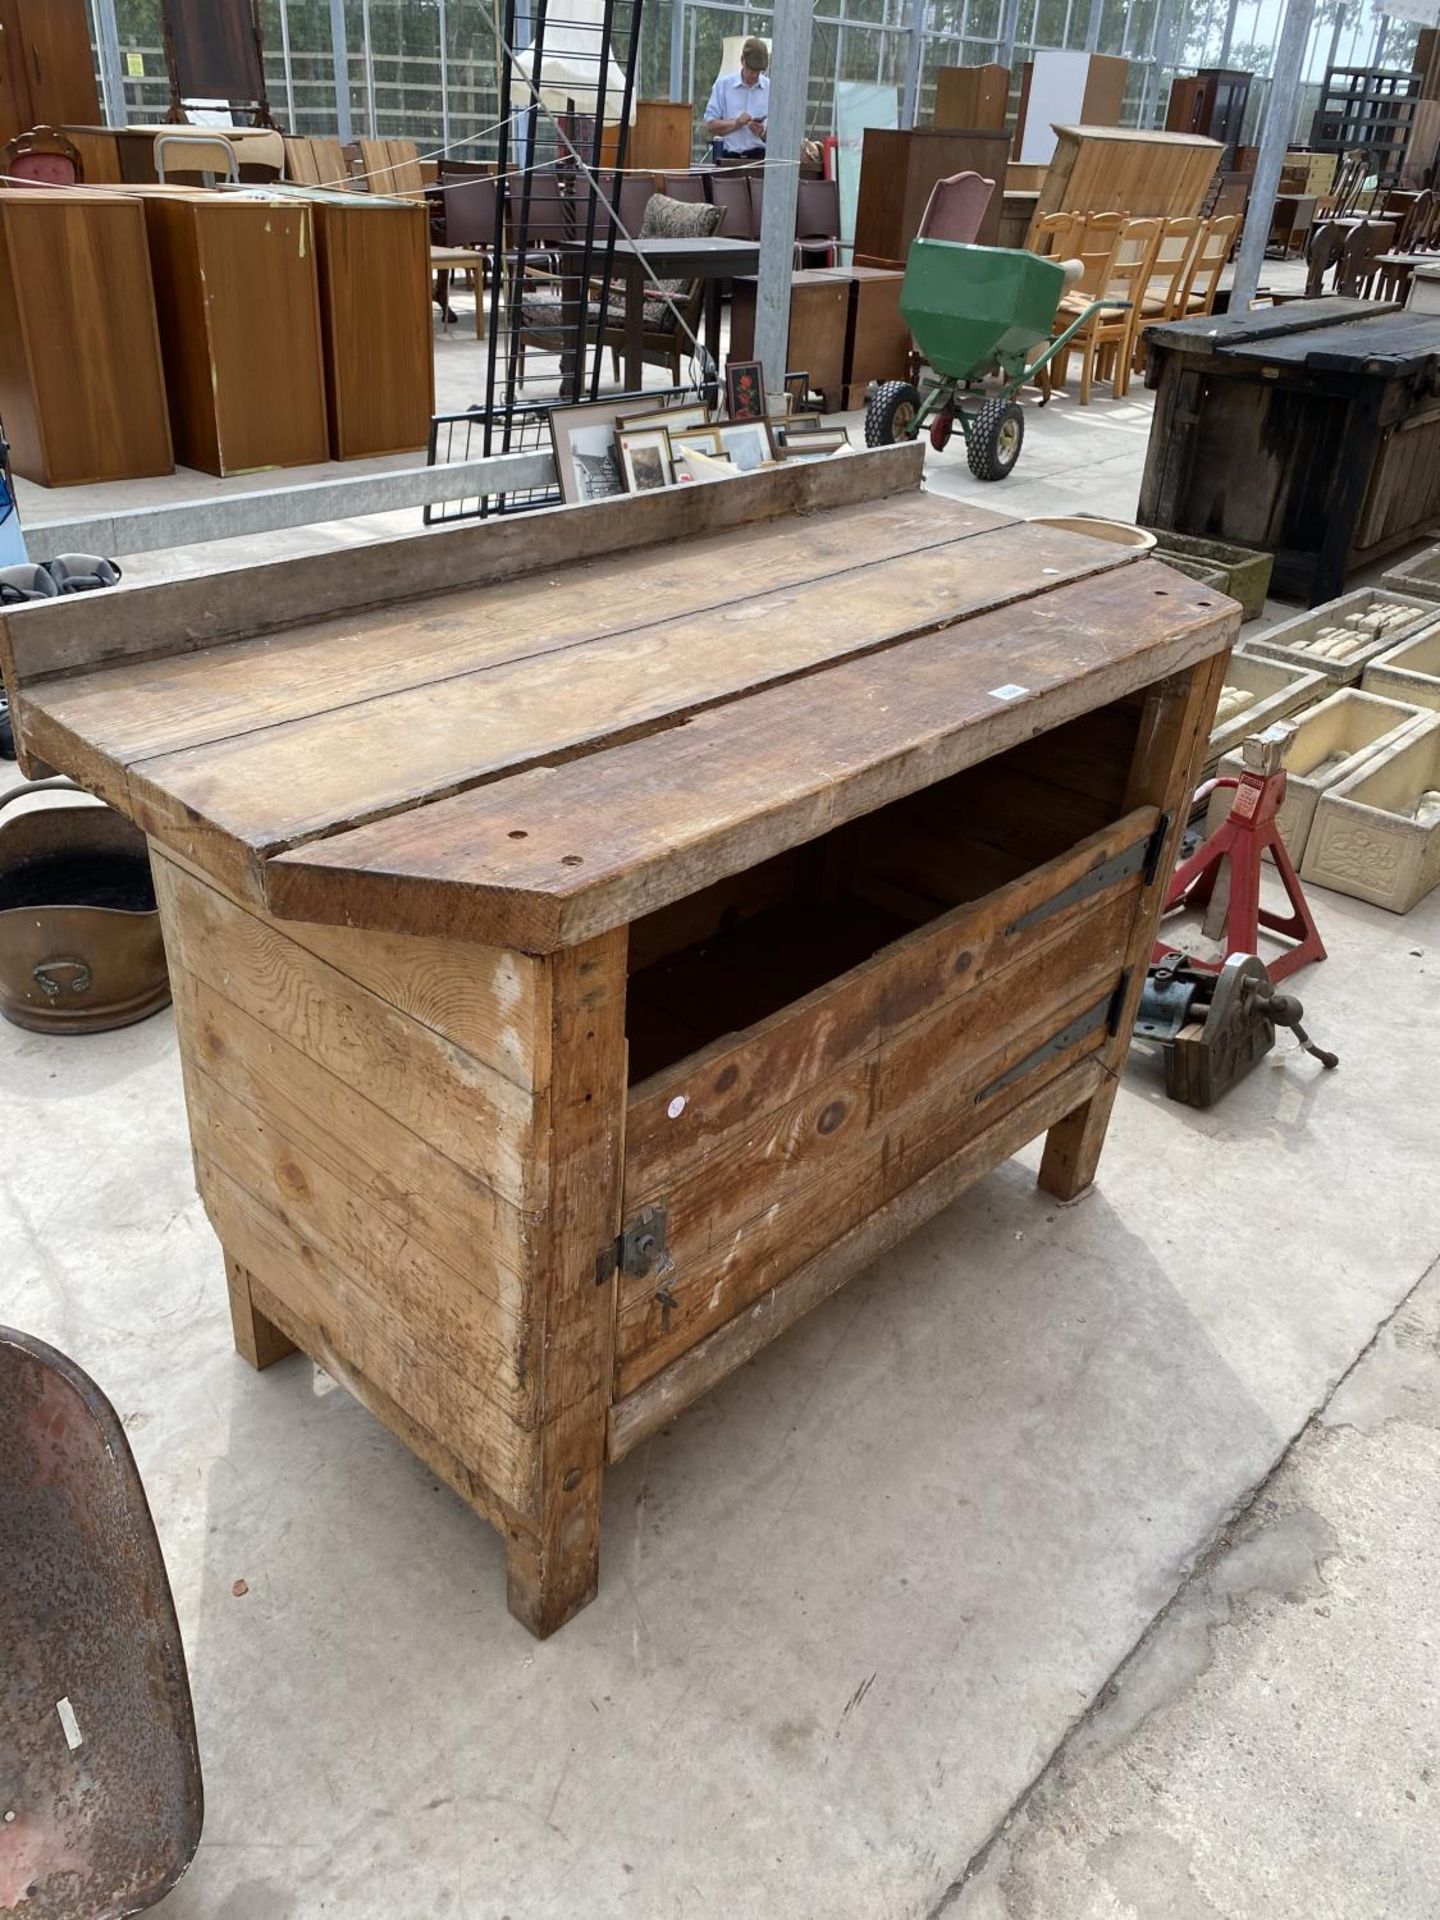 A VINTAGE WOODEN WORK BENCH WITH LOWER CUPBOARD